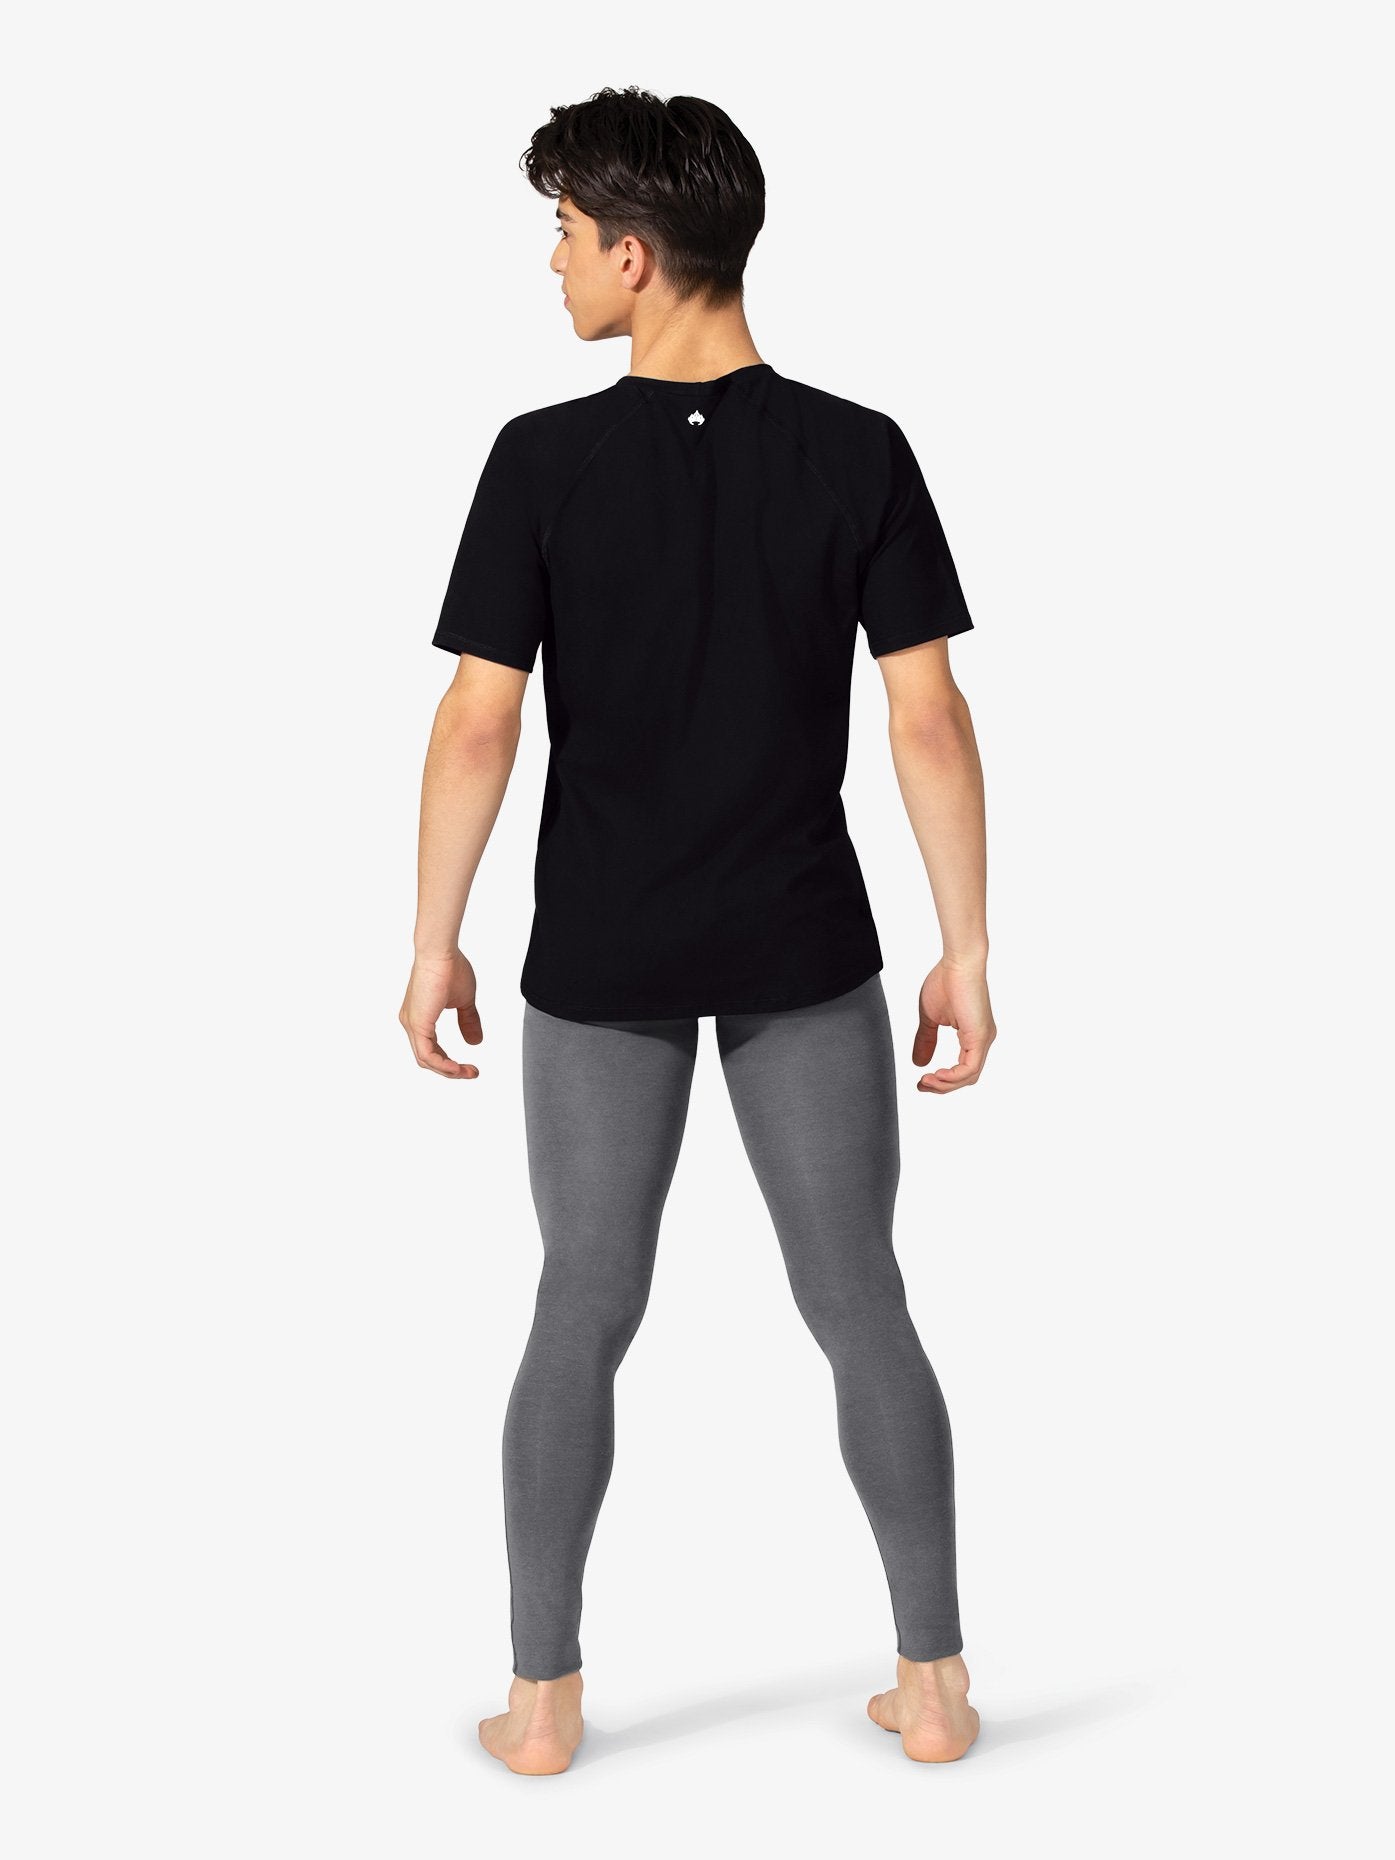 Men's seamless front bamboo compression grey leggings